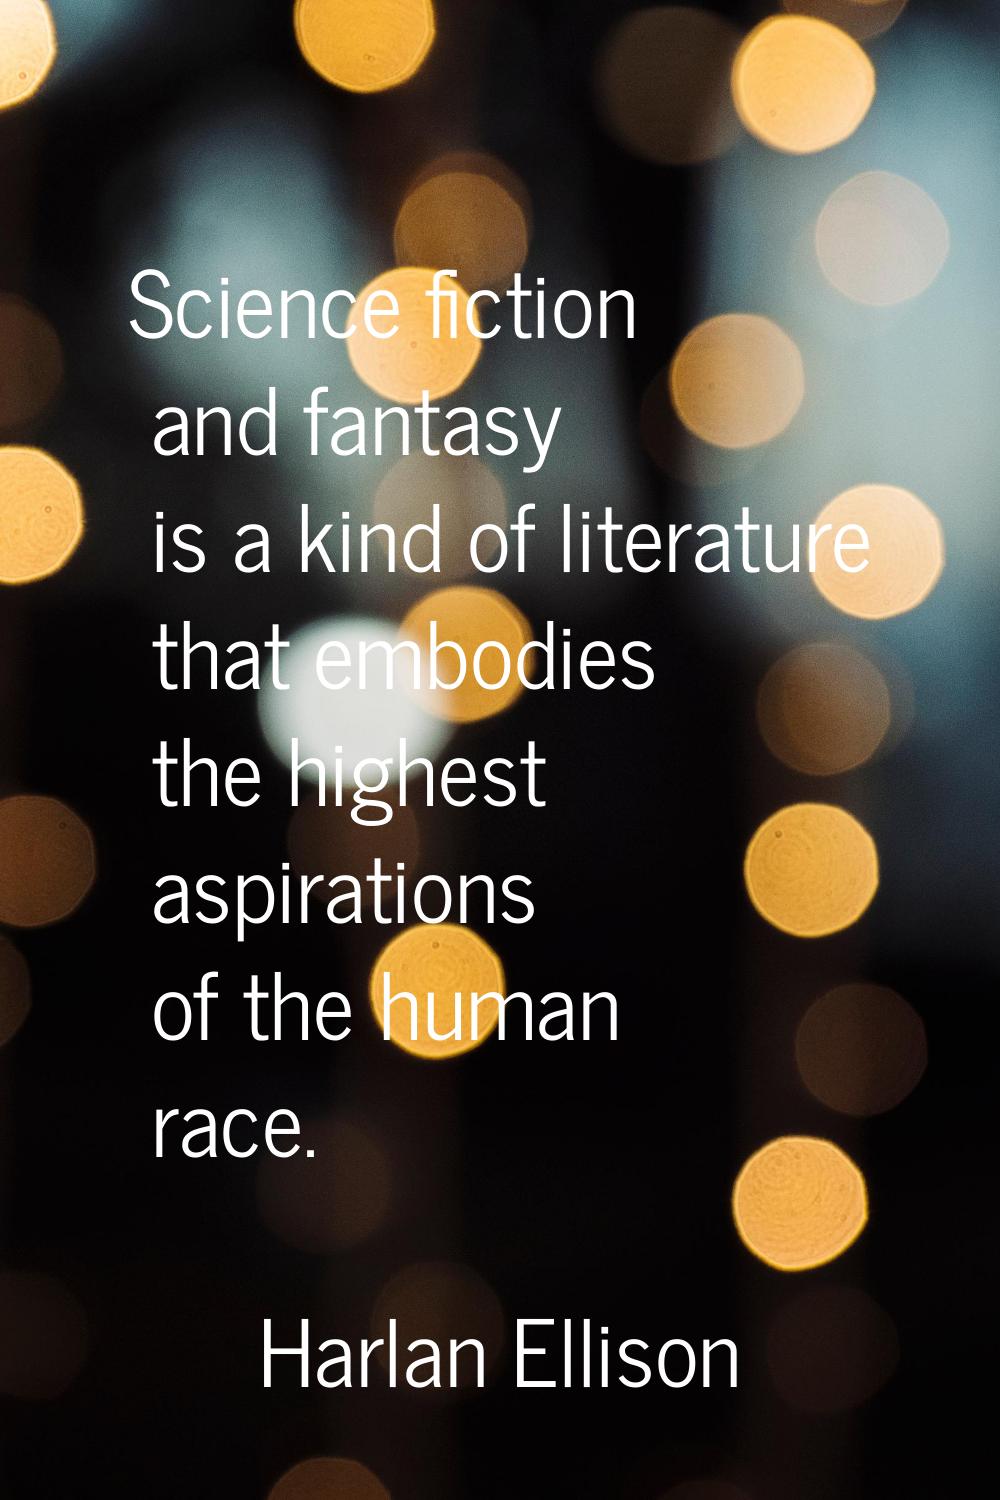 Science fiction and fantasy is a kind of literature that embodies the highest aspirations of the hu